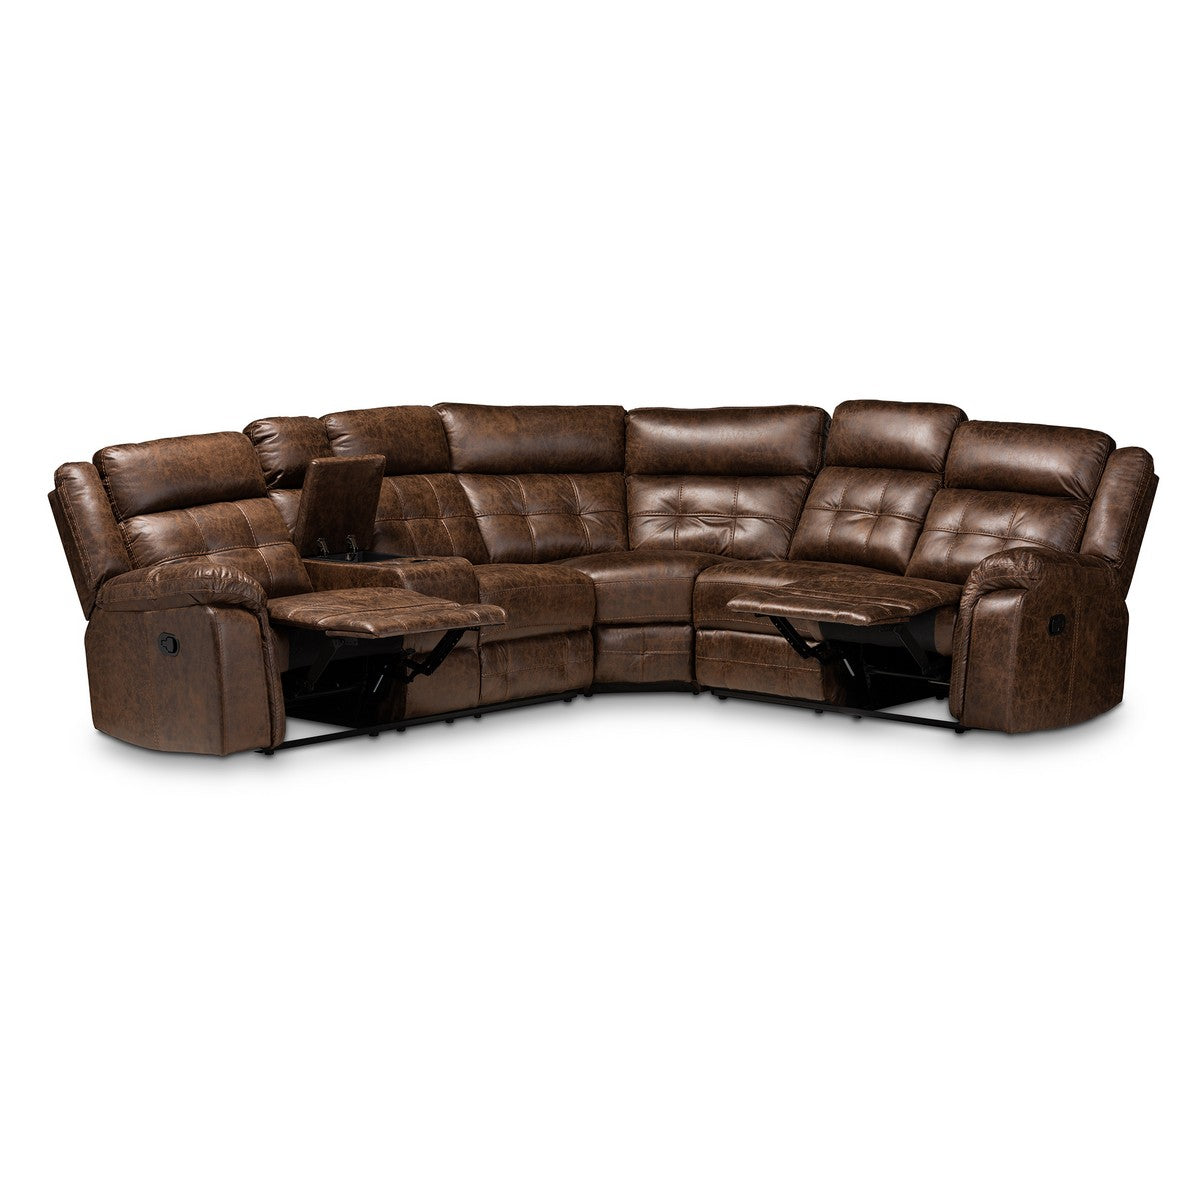 Baxton Studio Vesa Modern and Contemporary Brown Leather-Like Fabric Upholstered 6-Piece Sectional Recliner Sofa with 2 Reclining Seats